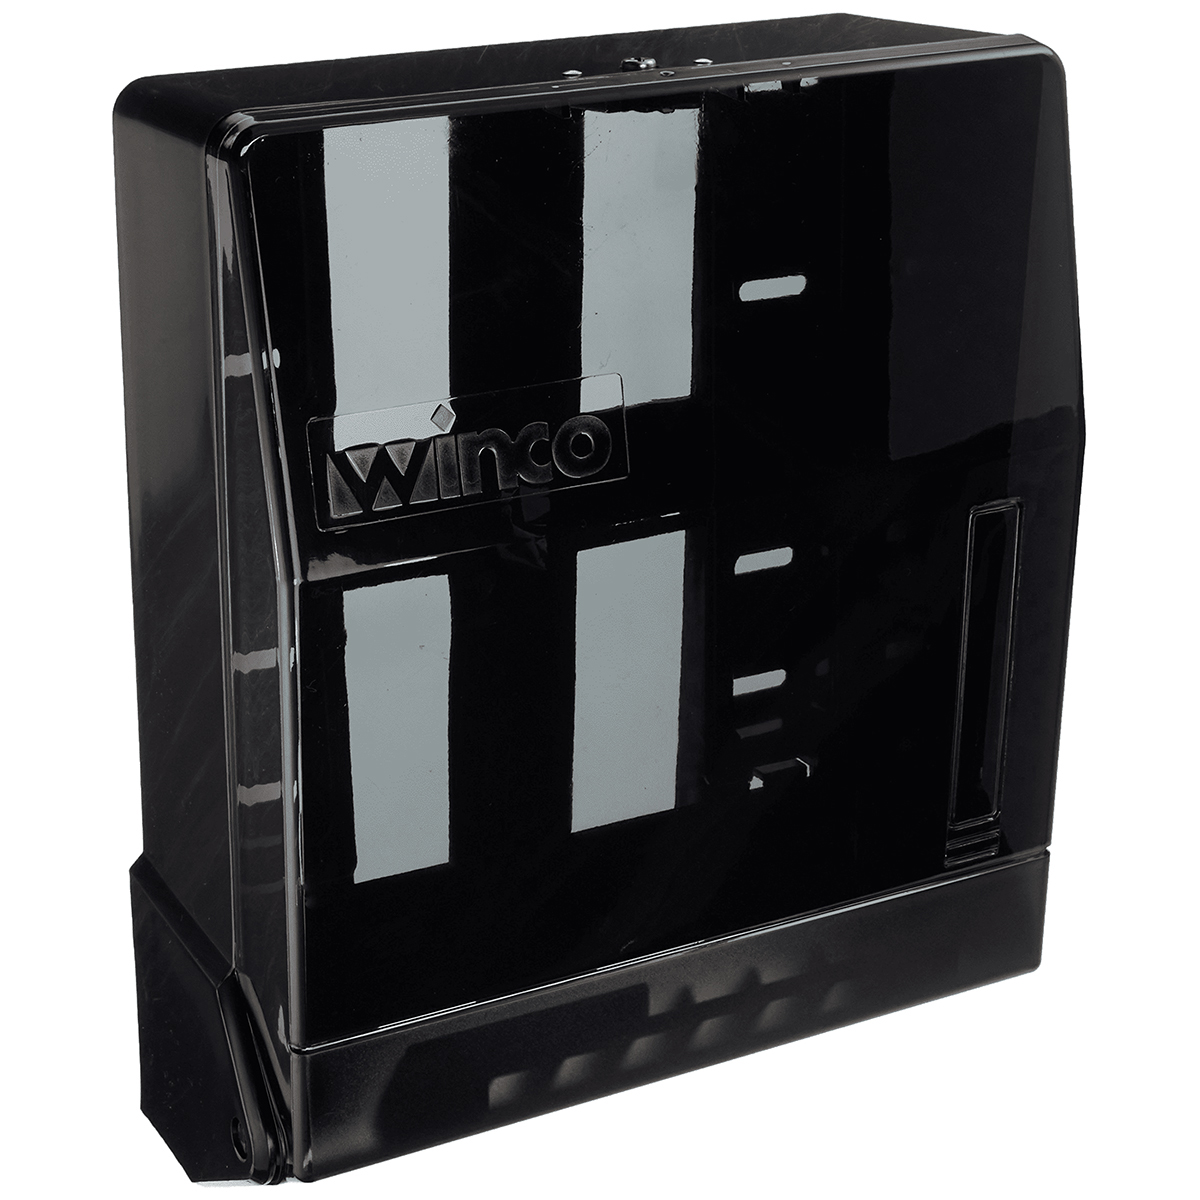 Winware by Winco TD-300 Paper Towel Dispenser image 2